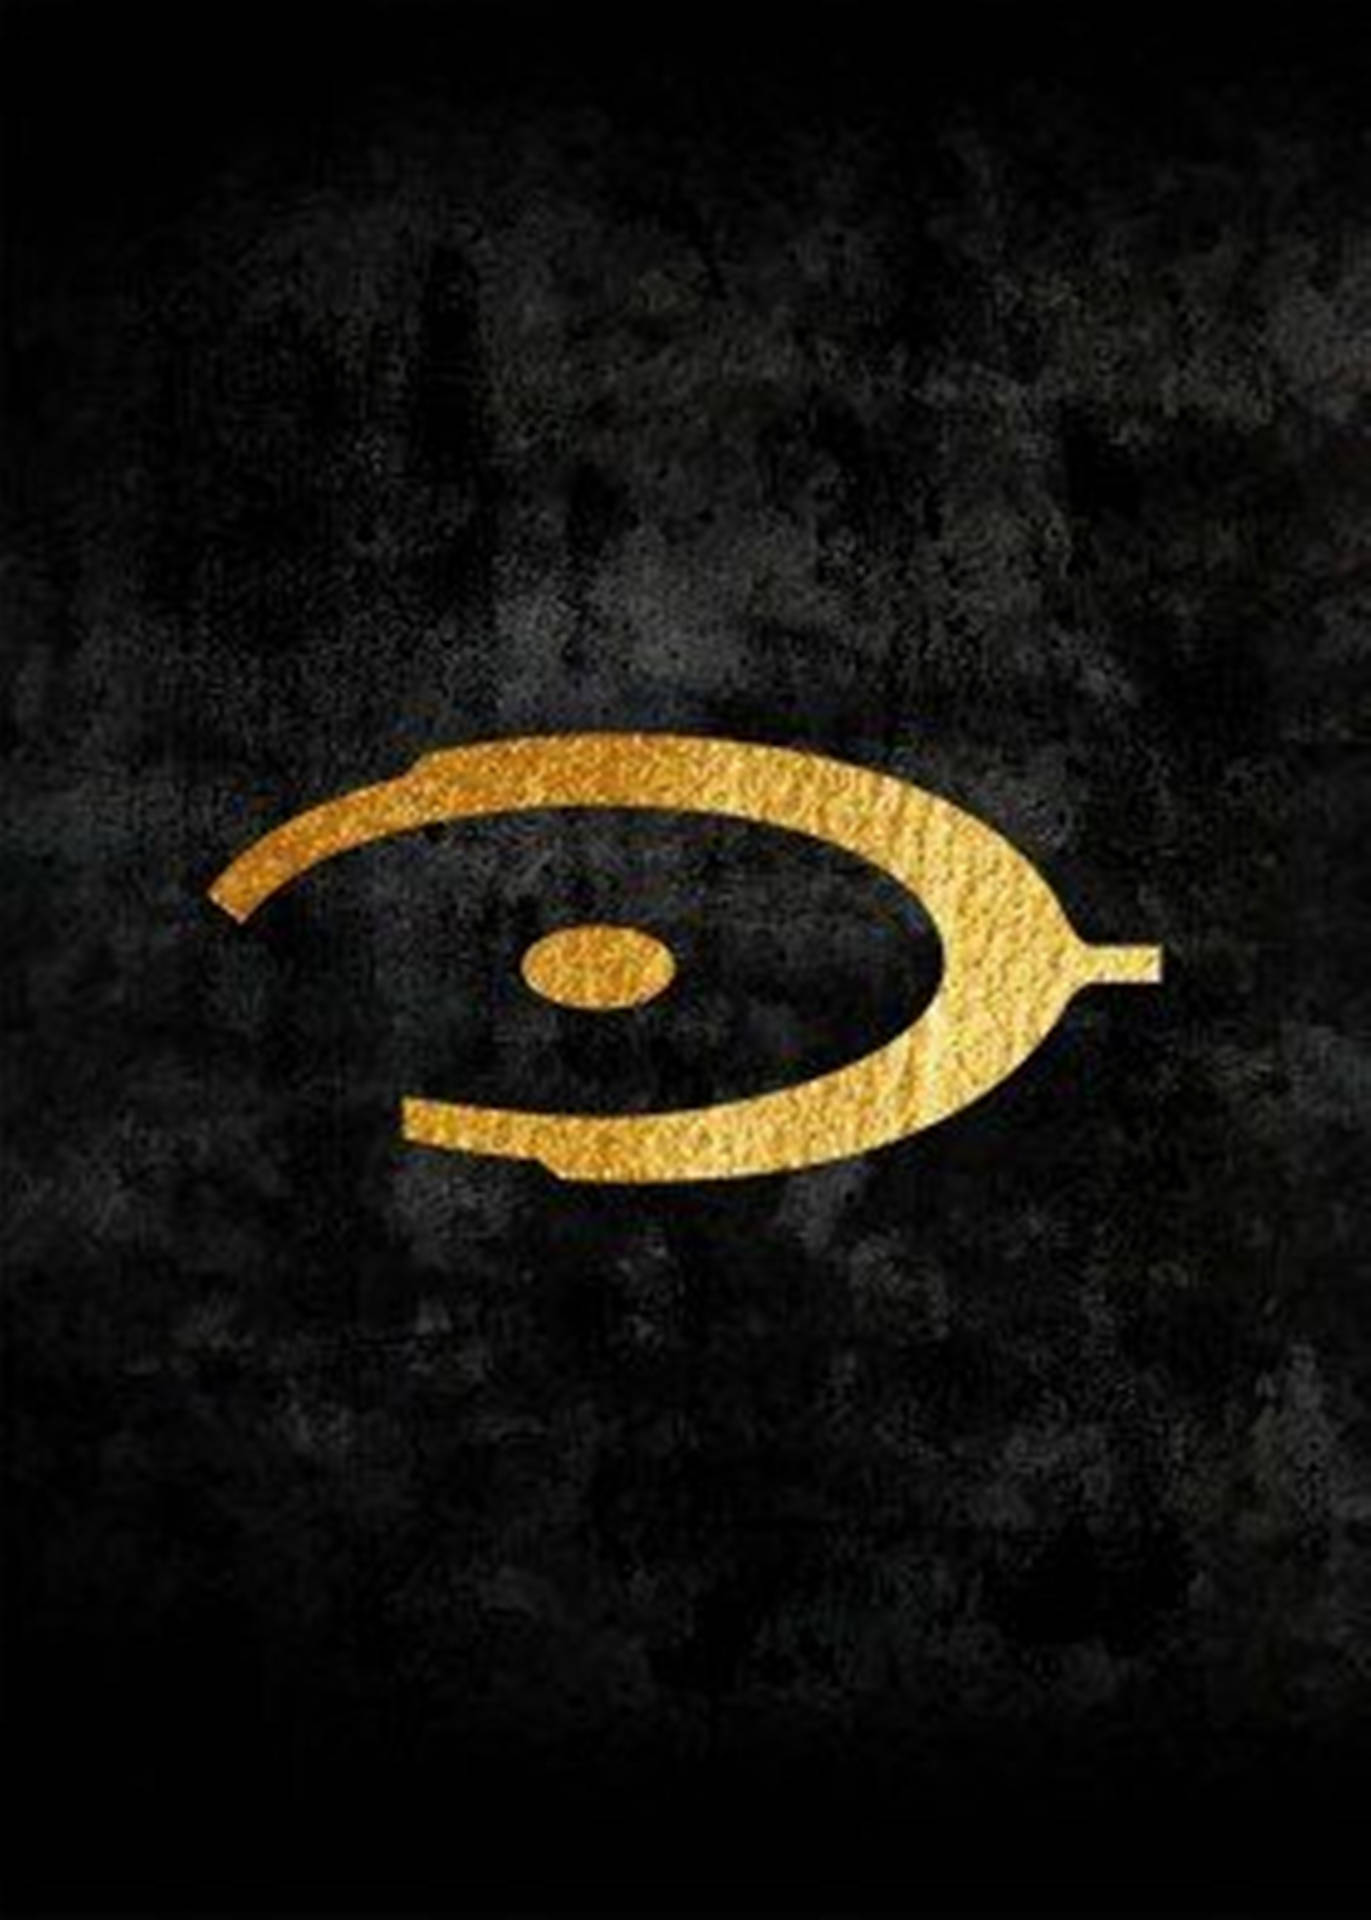 Iconic Gold Halo Video Game Logo Wallpaper